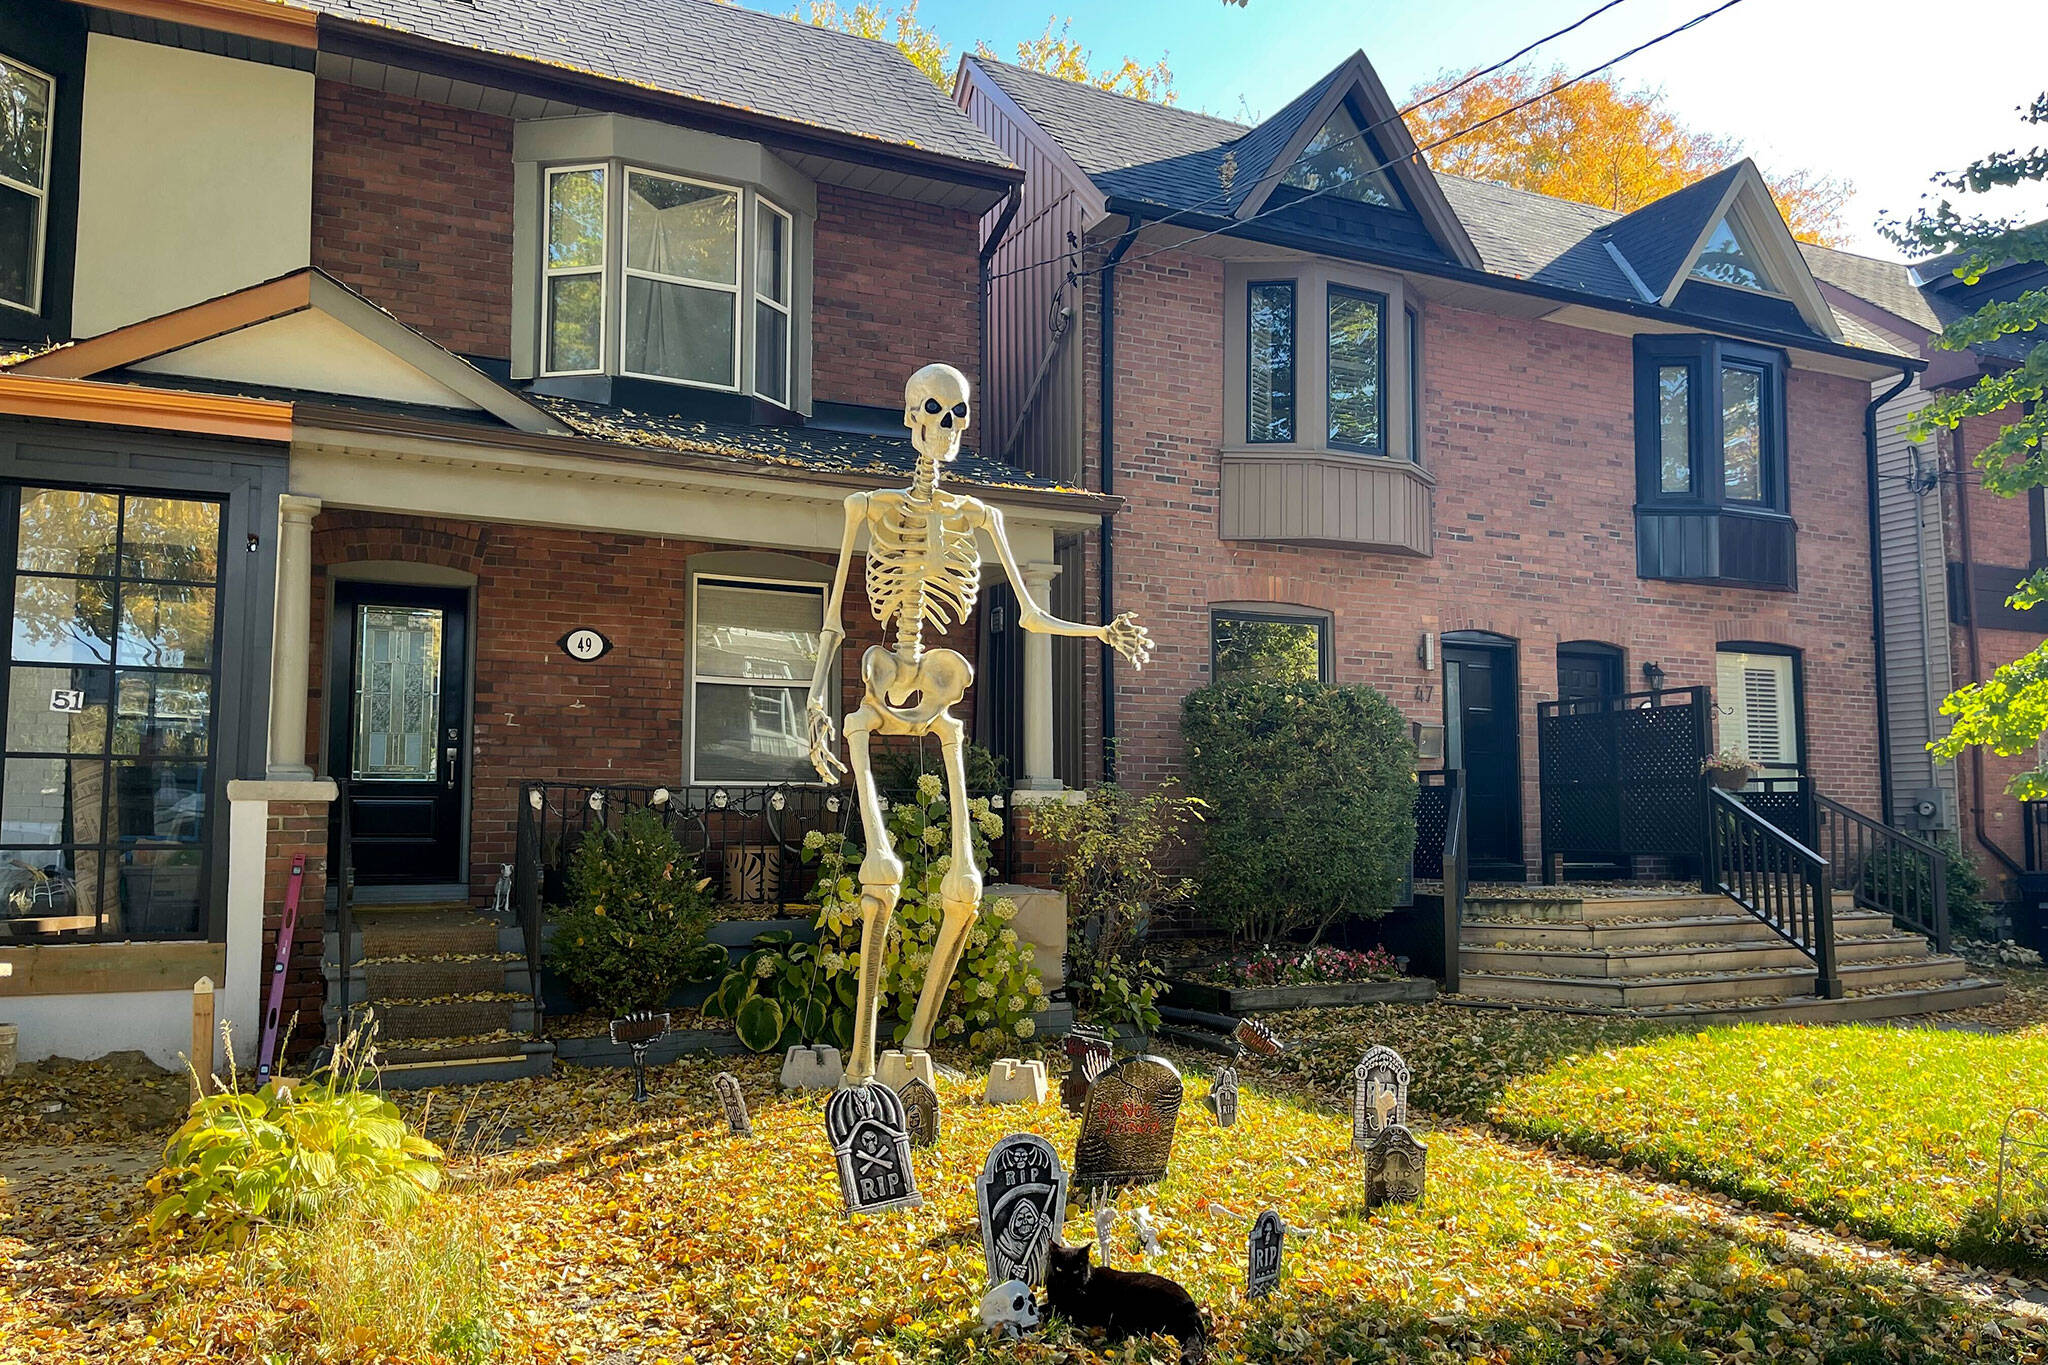 A giant skeleton is the hottest selling item at Home Depot right now